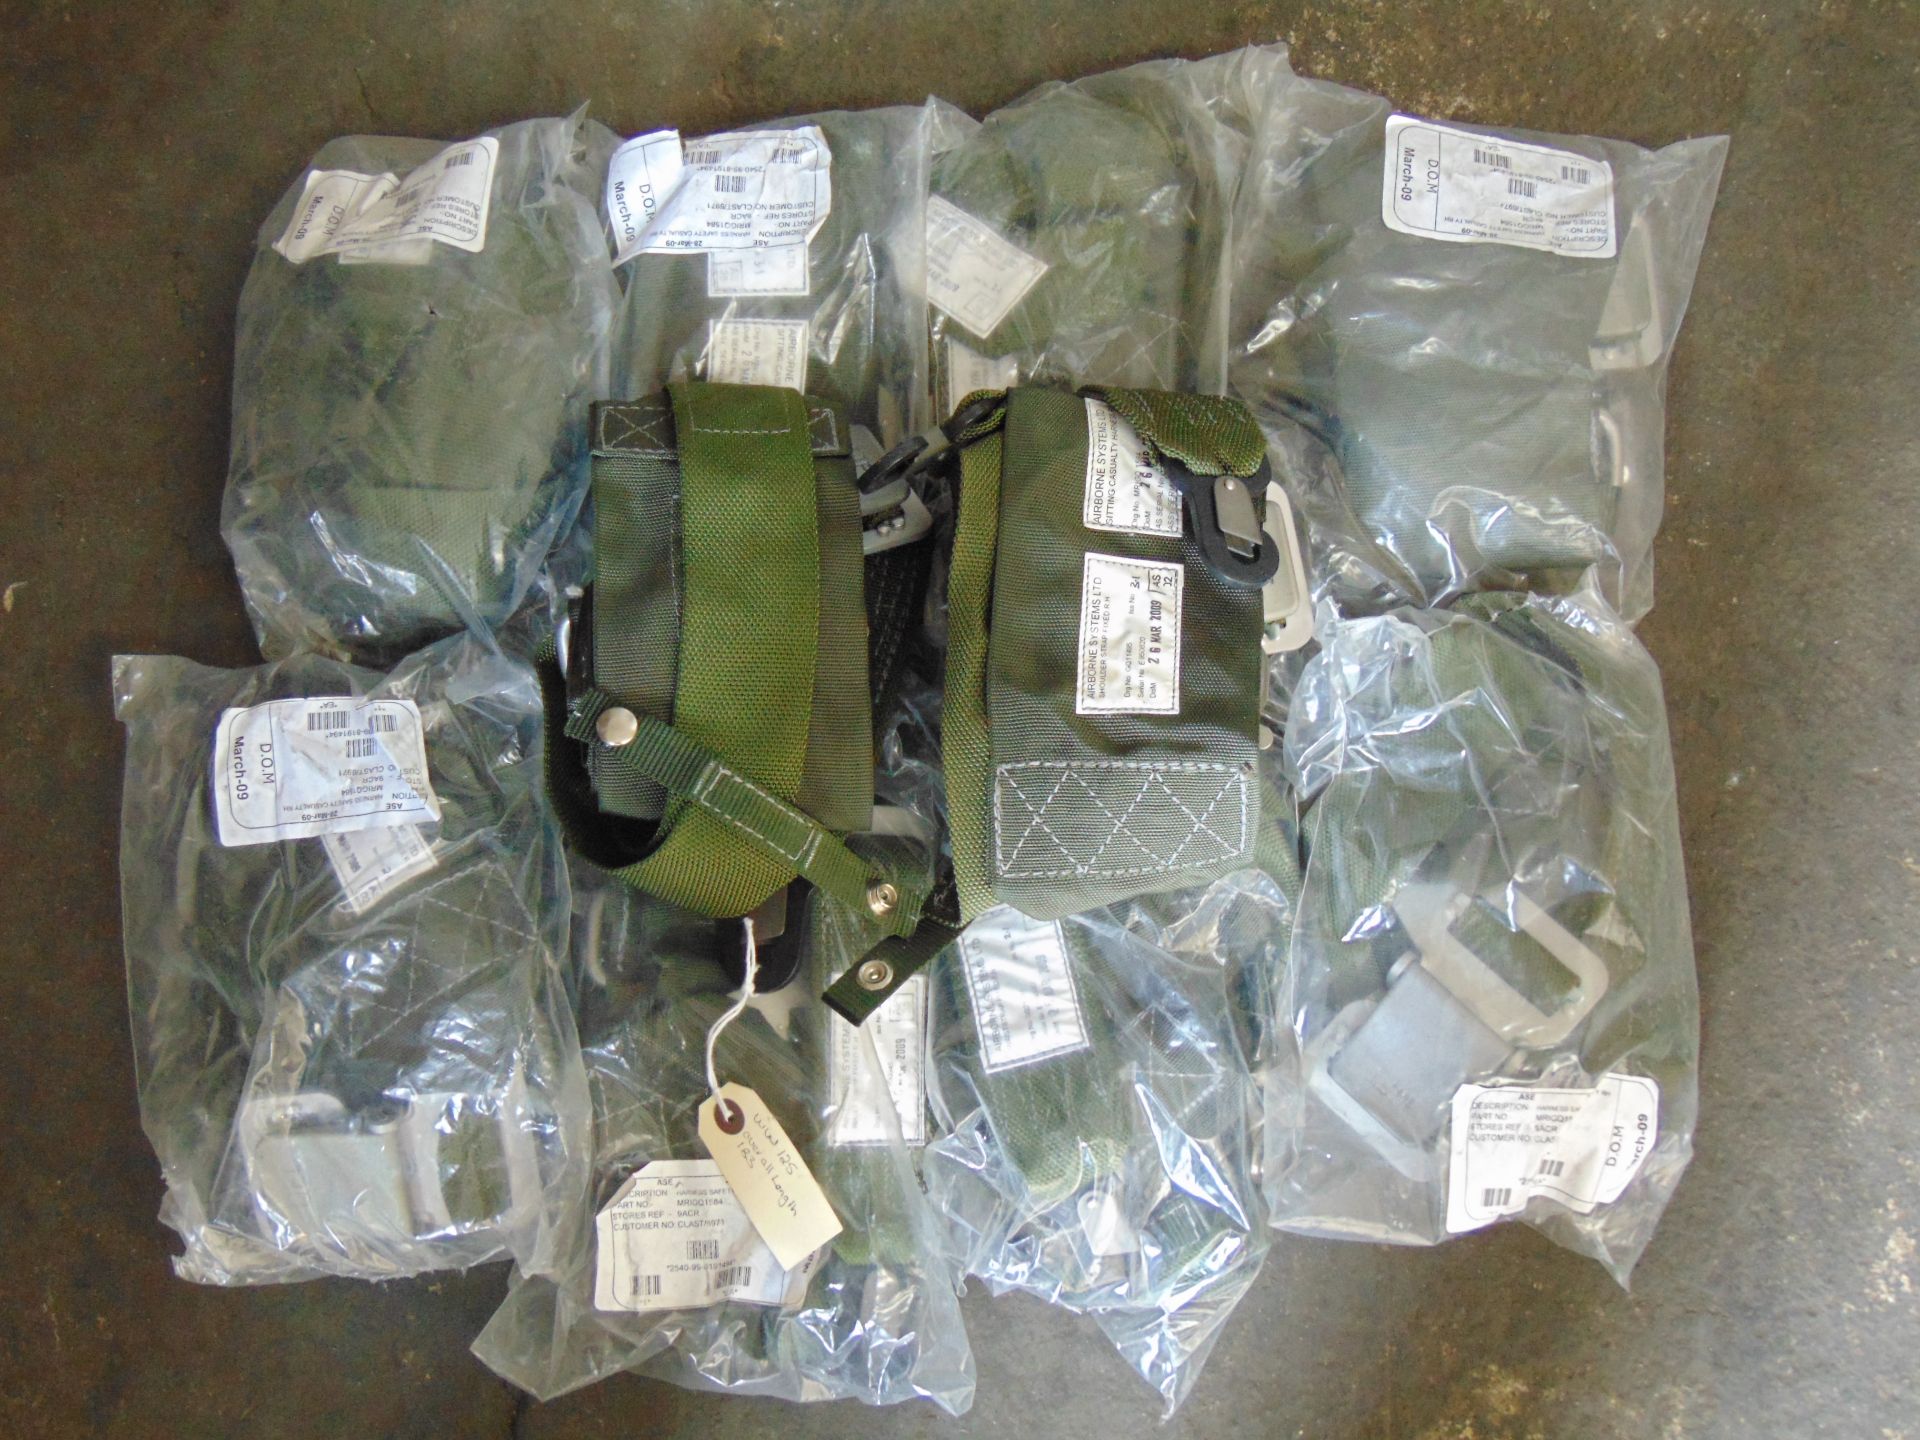 10 x Airborne Systems Ltd Casualty Saftey Harnesses